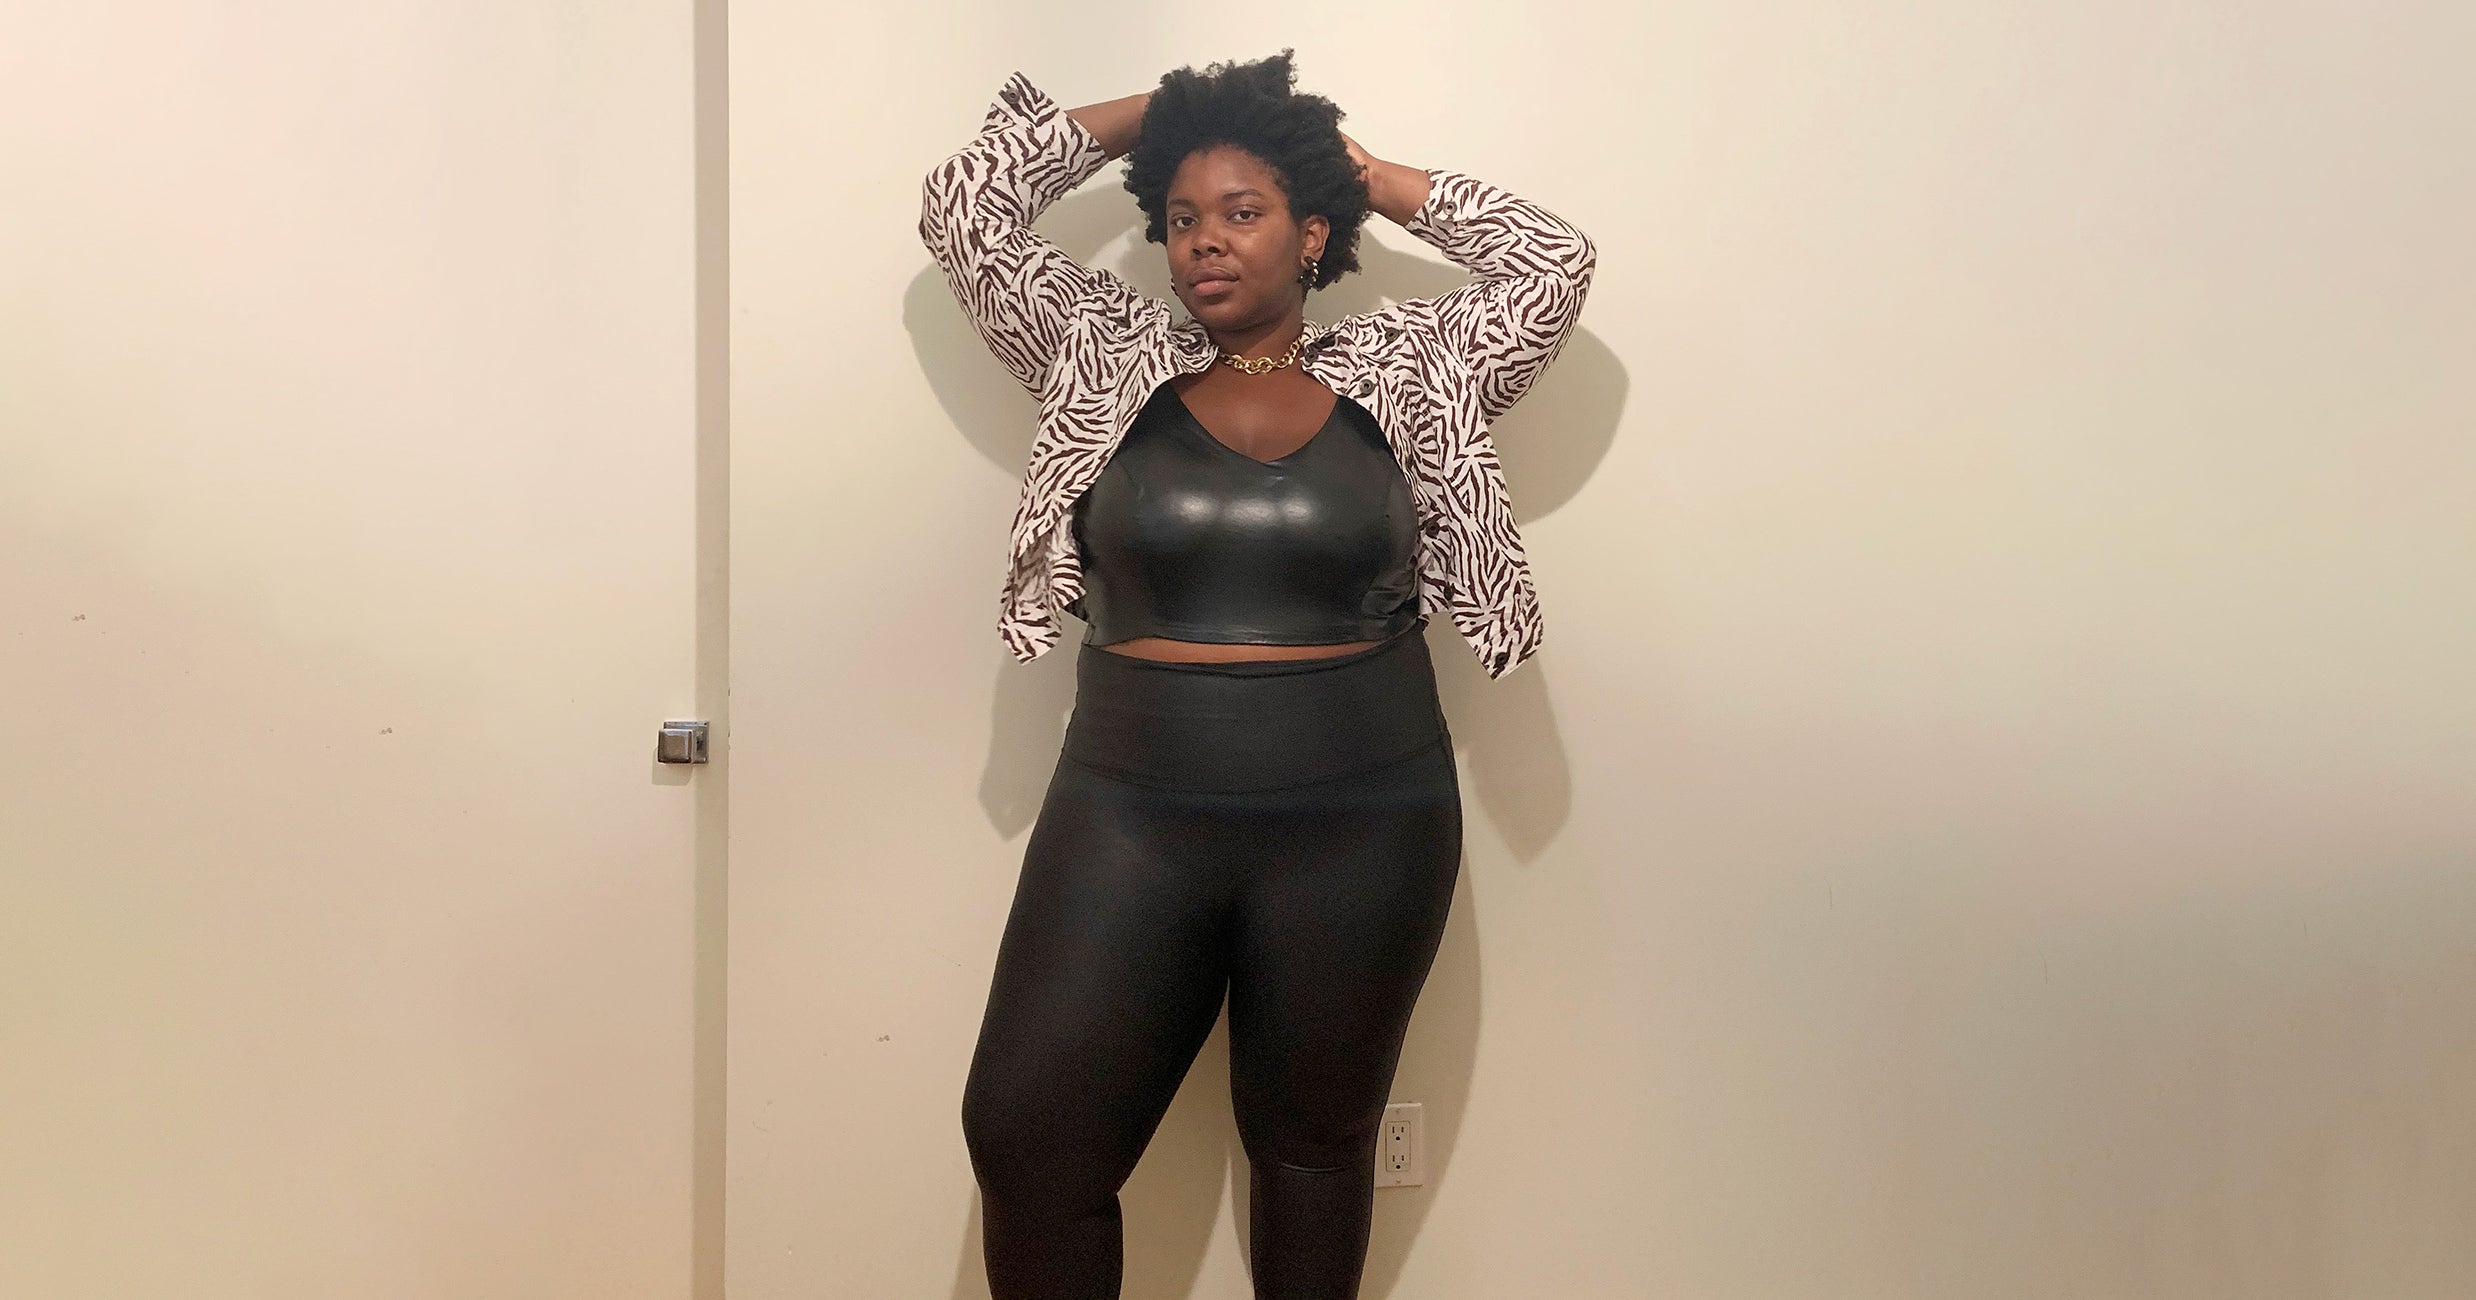 Spanx's Faux-Leather Leggings Make My Butt Look Great